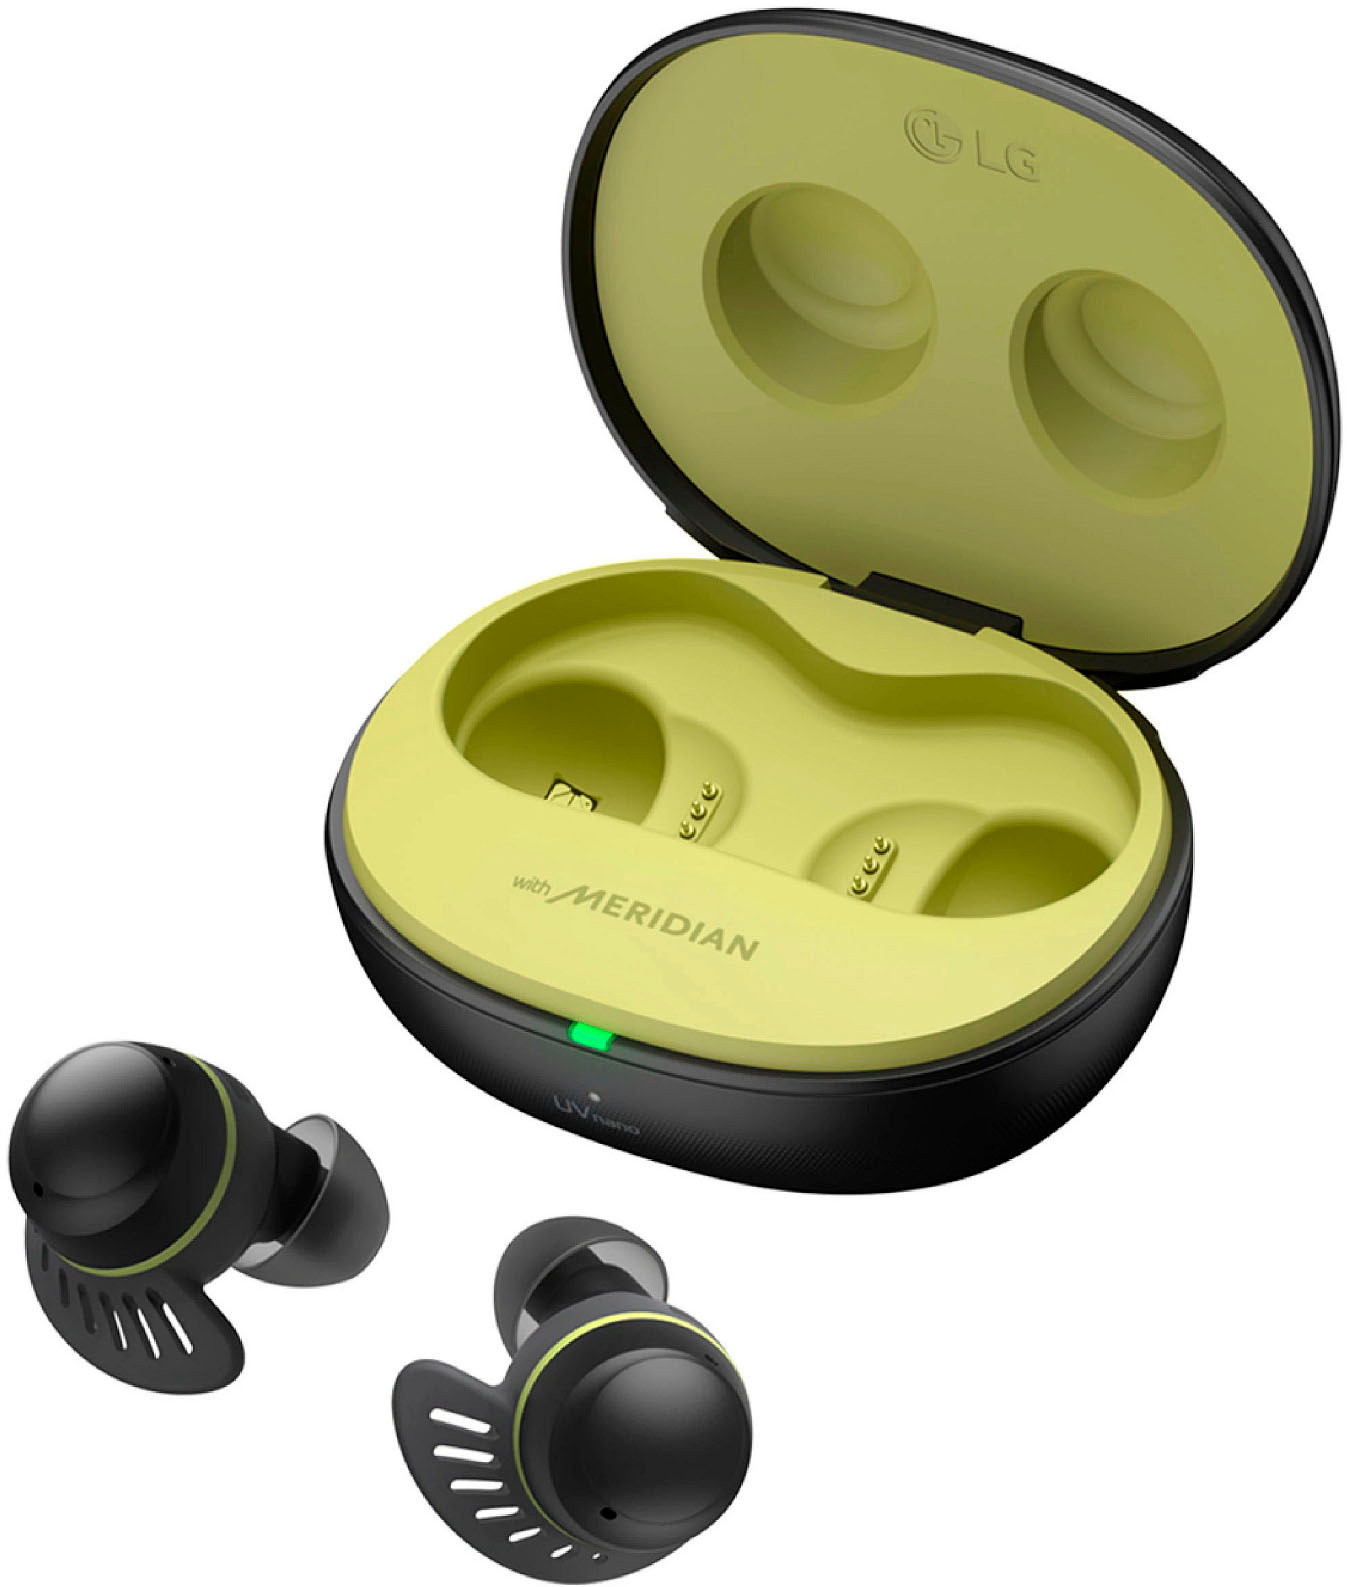 Jabra Elite 4 Active earbuds have a secure fit, keeping them in your ears  during exercise » Gadget Flow